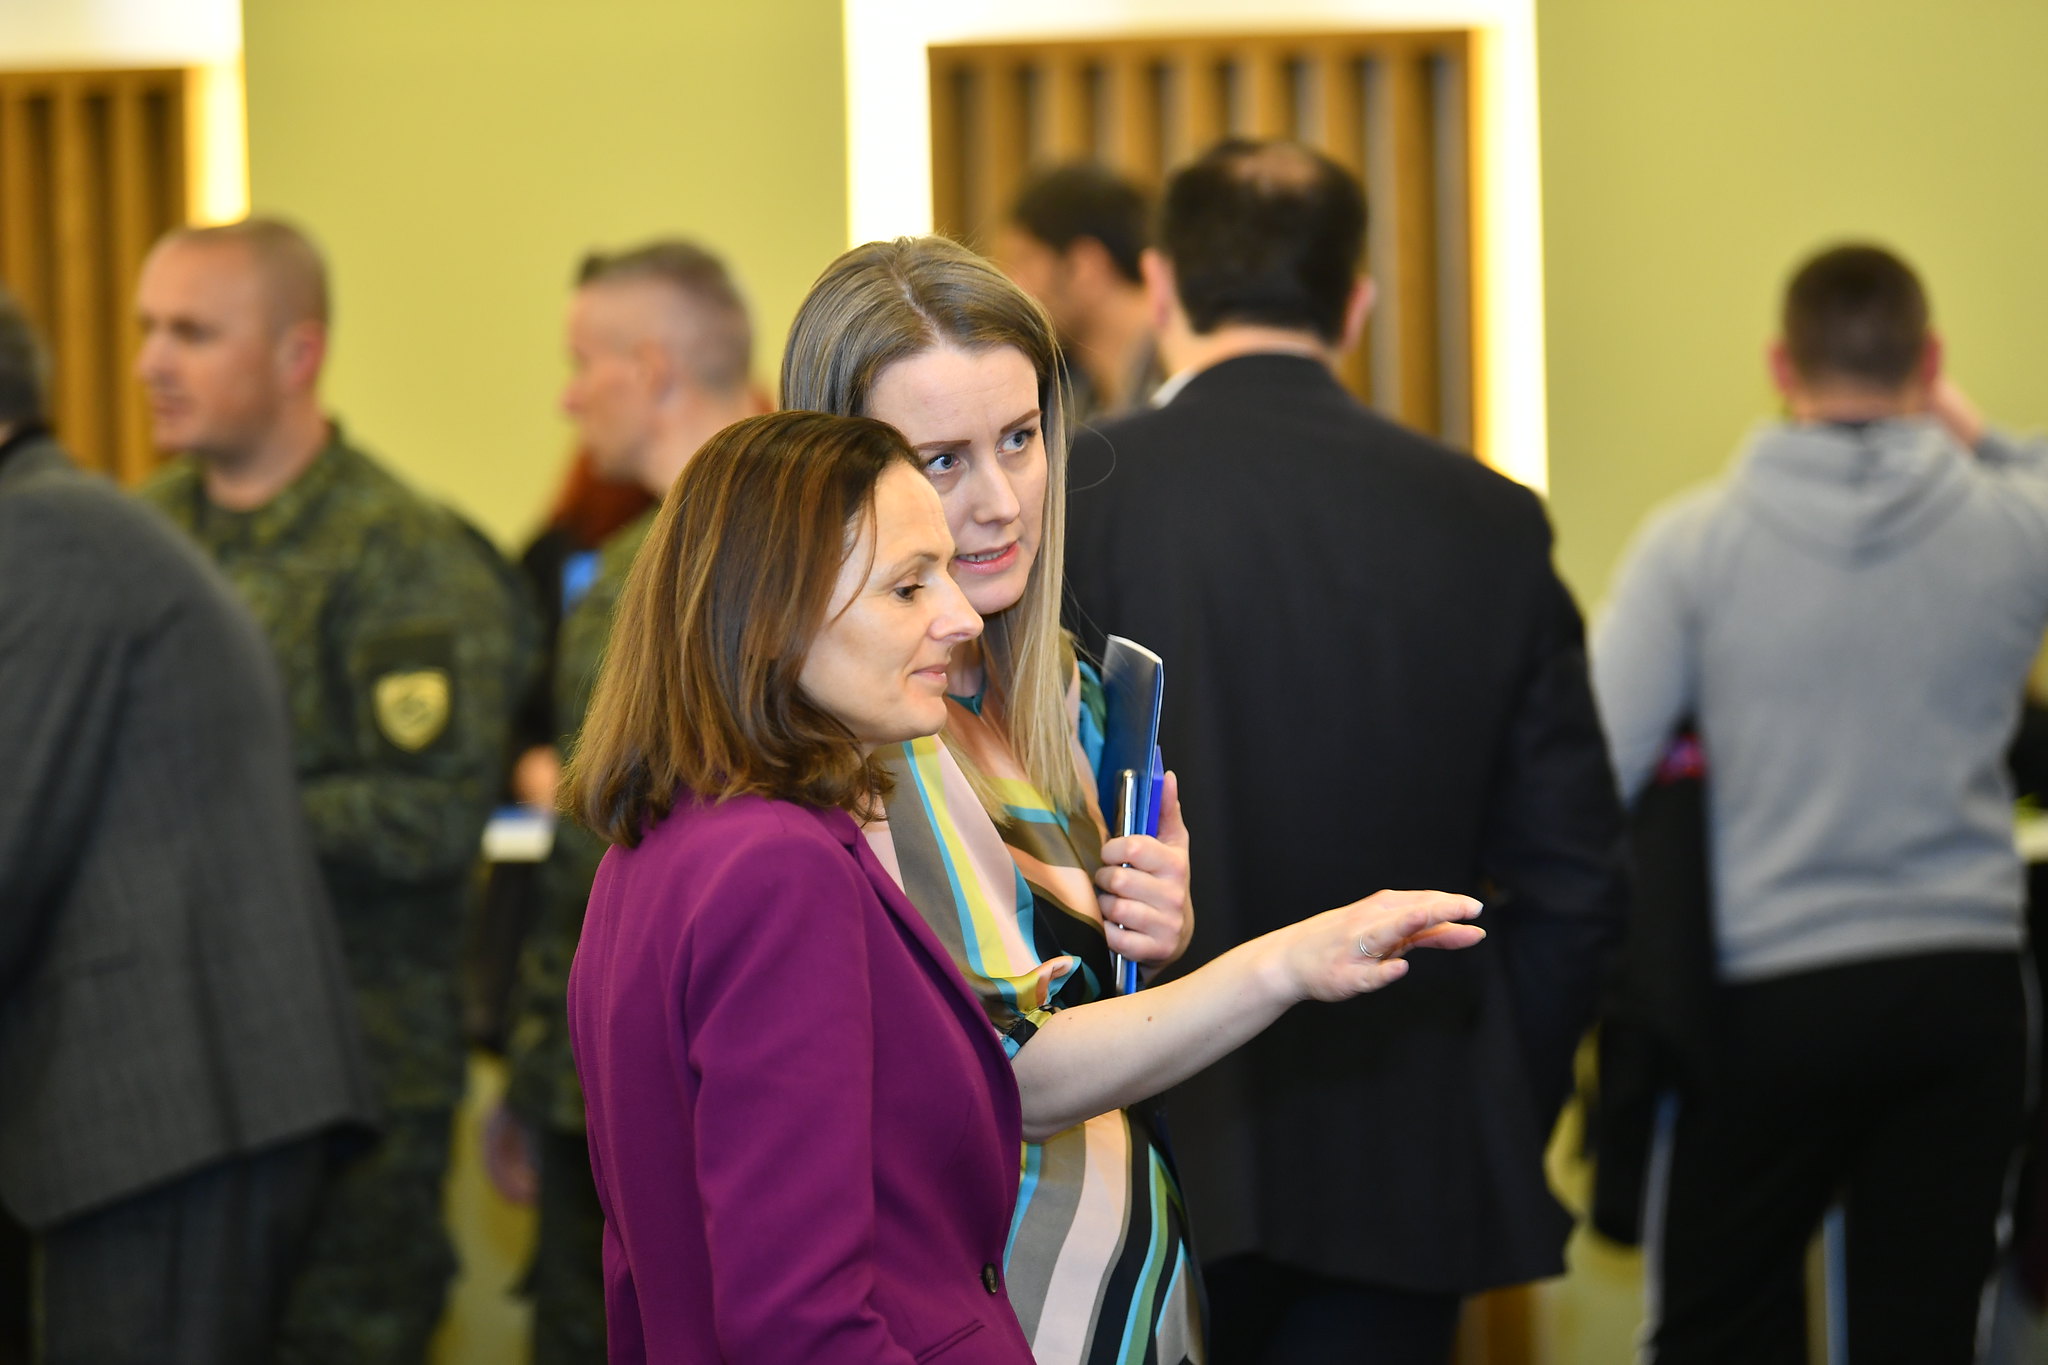 International Mother Language Day event organized by the Office of the Language Commissioner, the British Embassy Pristina and the IOM, 21 February 2020